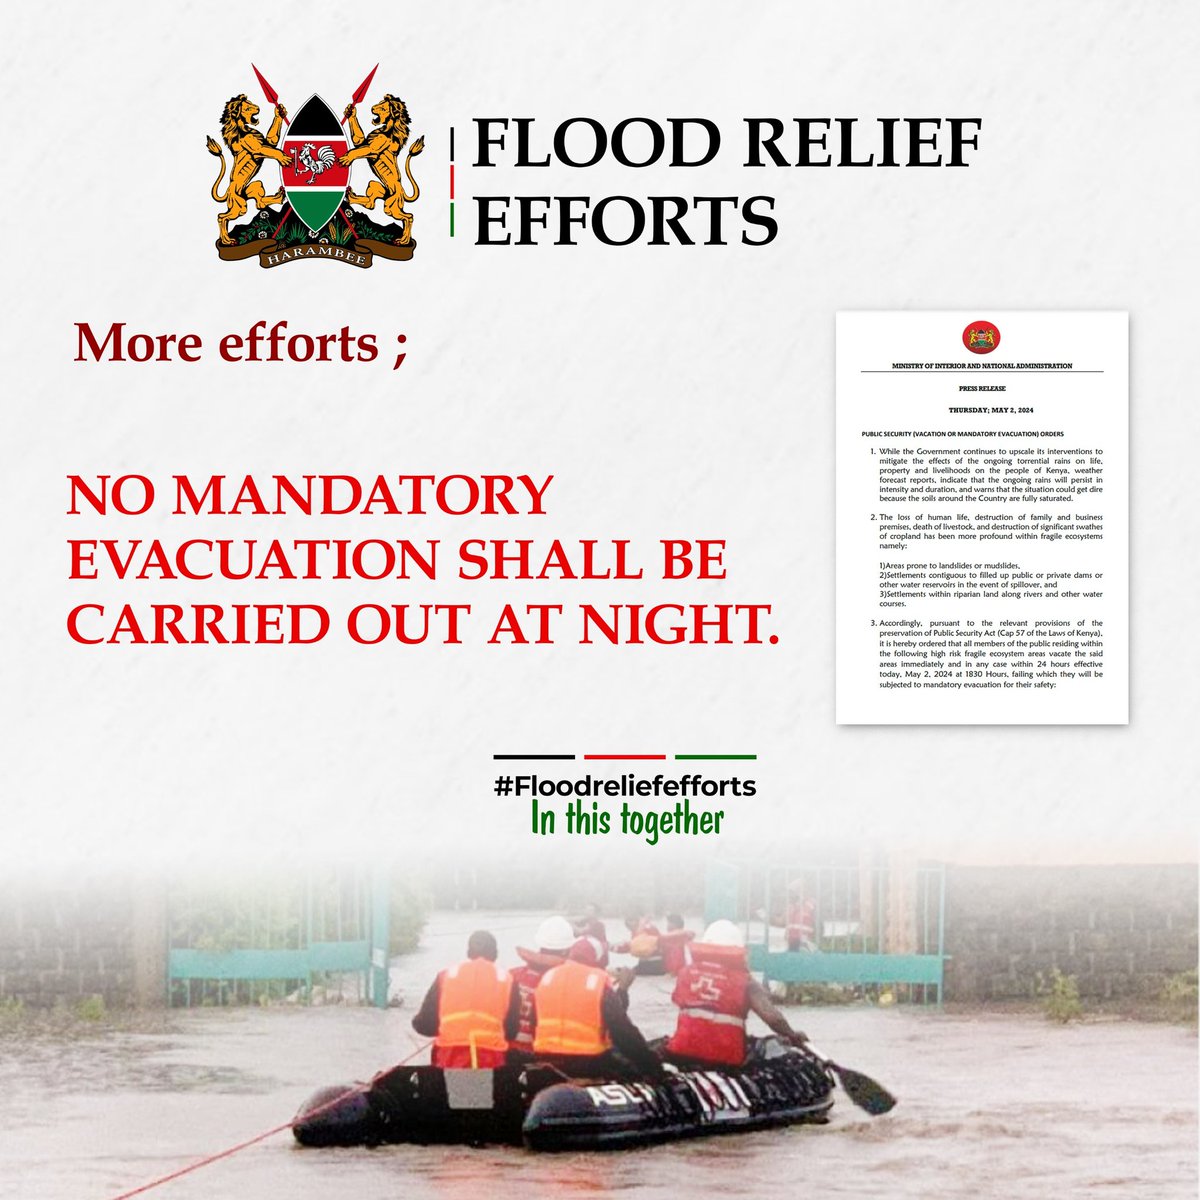 Efforts to provide aid to citizens impacted by floods, mudslides, and landslides highlight the Government's compassion and responsiveness during crises.
#FloodReliefEfforts
In It Together